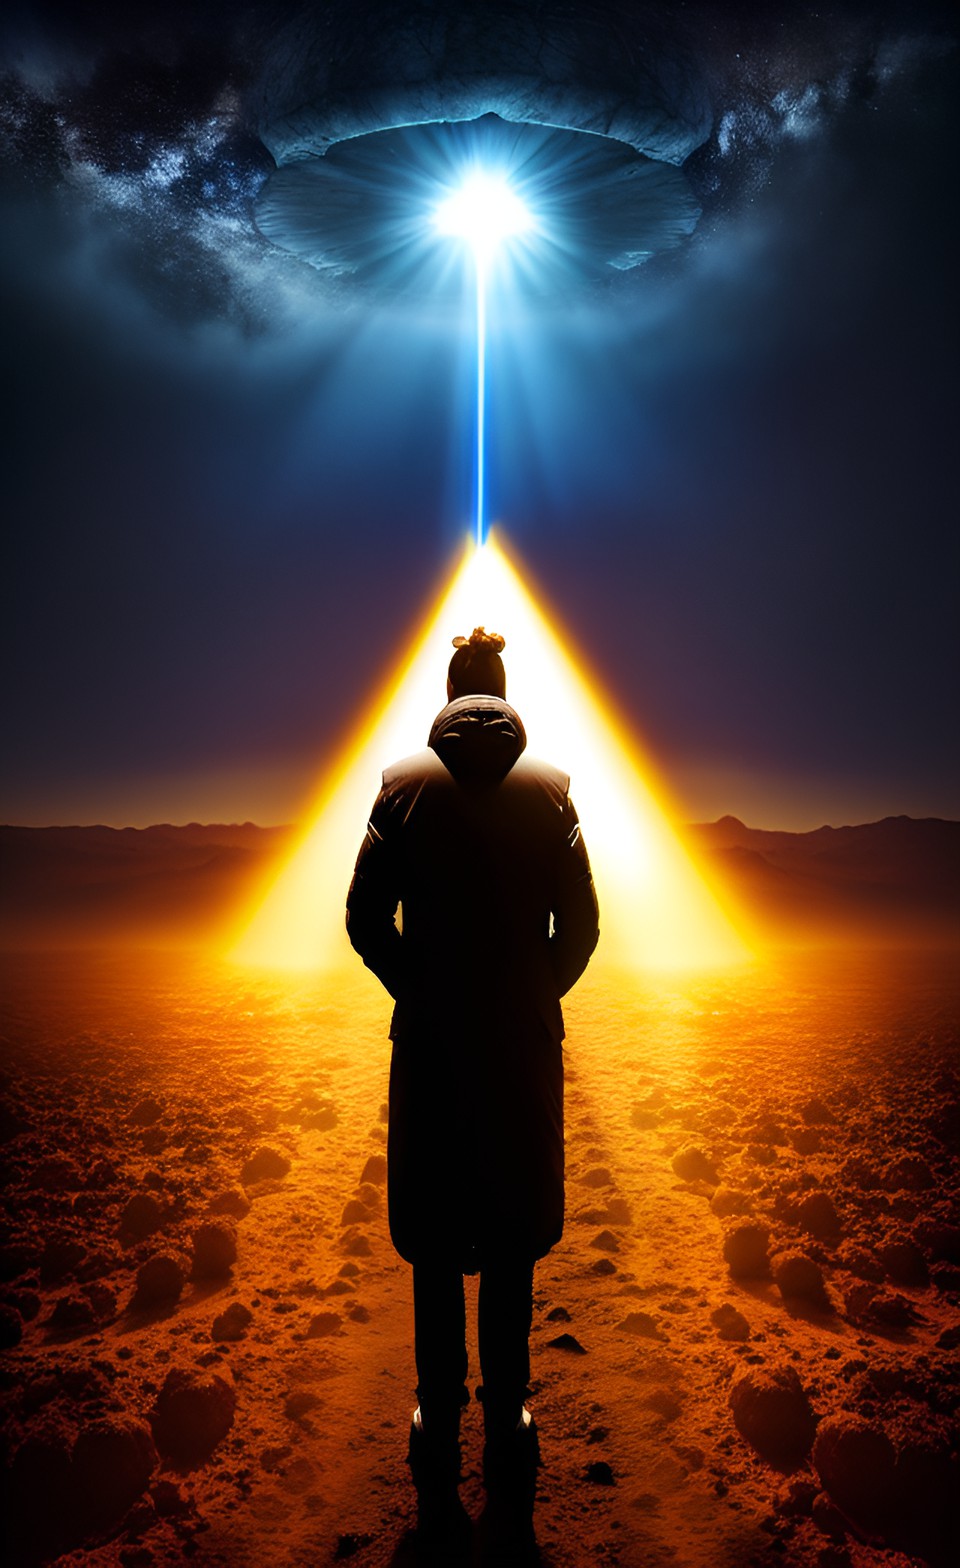 a man facing an almighty source of light on￼ an extraterrestrial planet preview